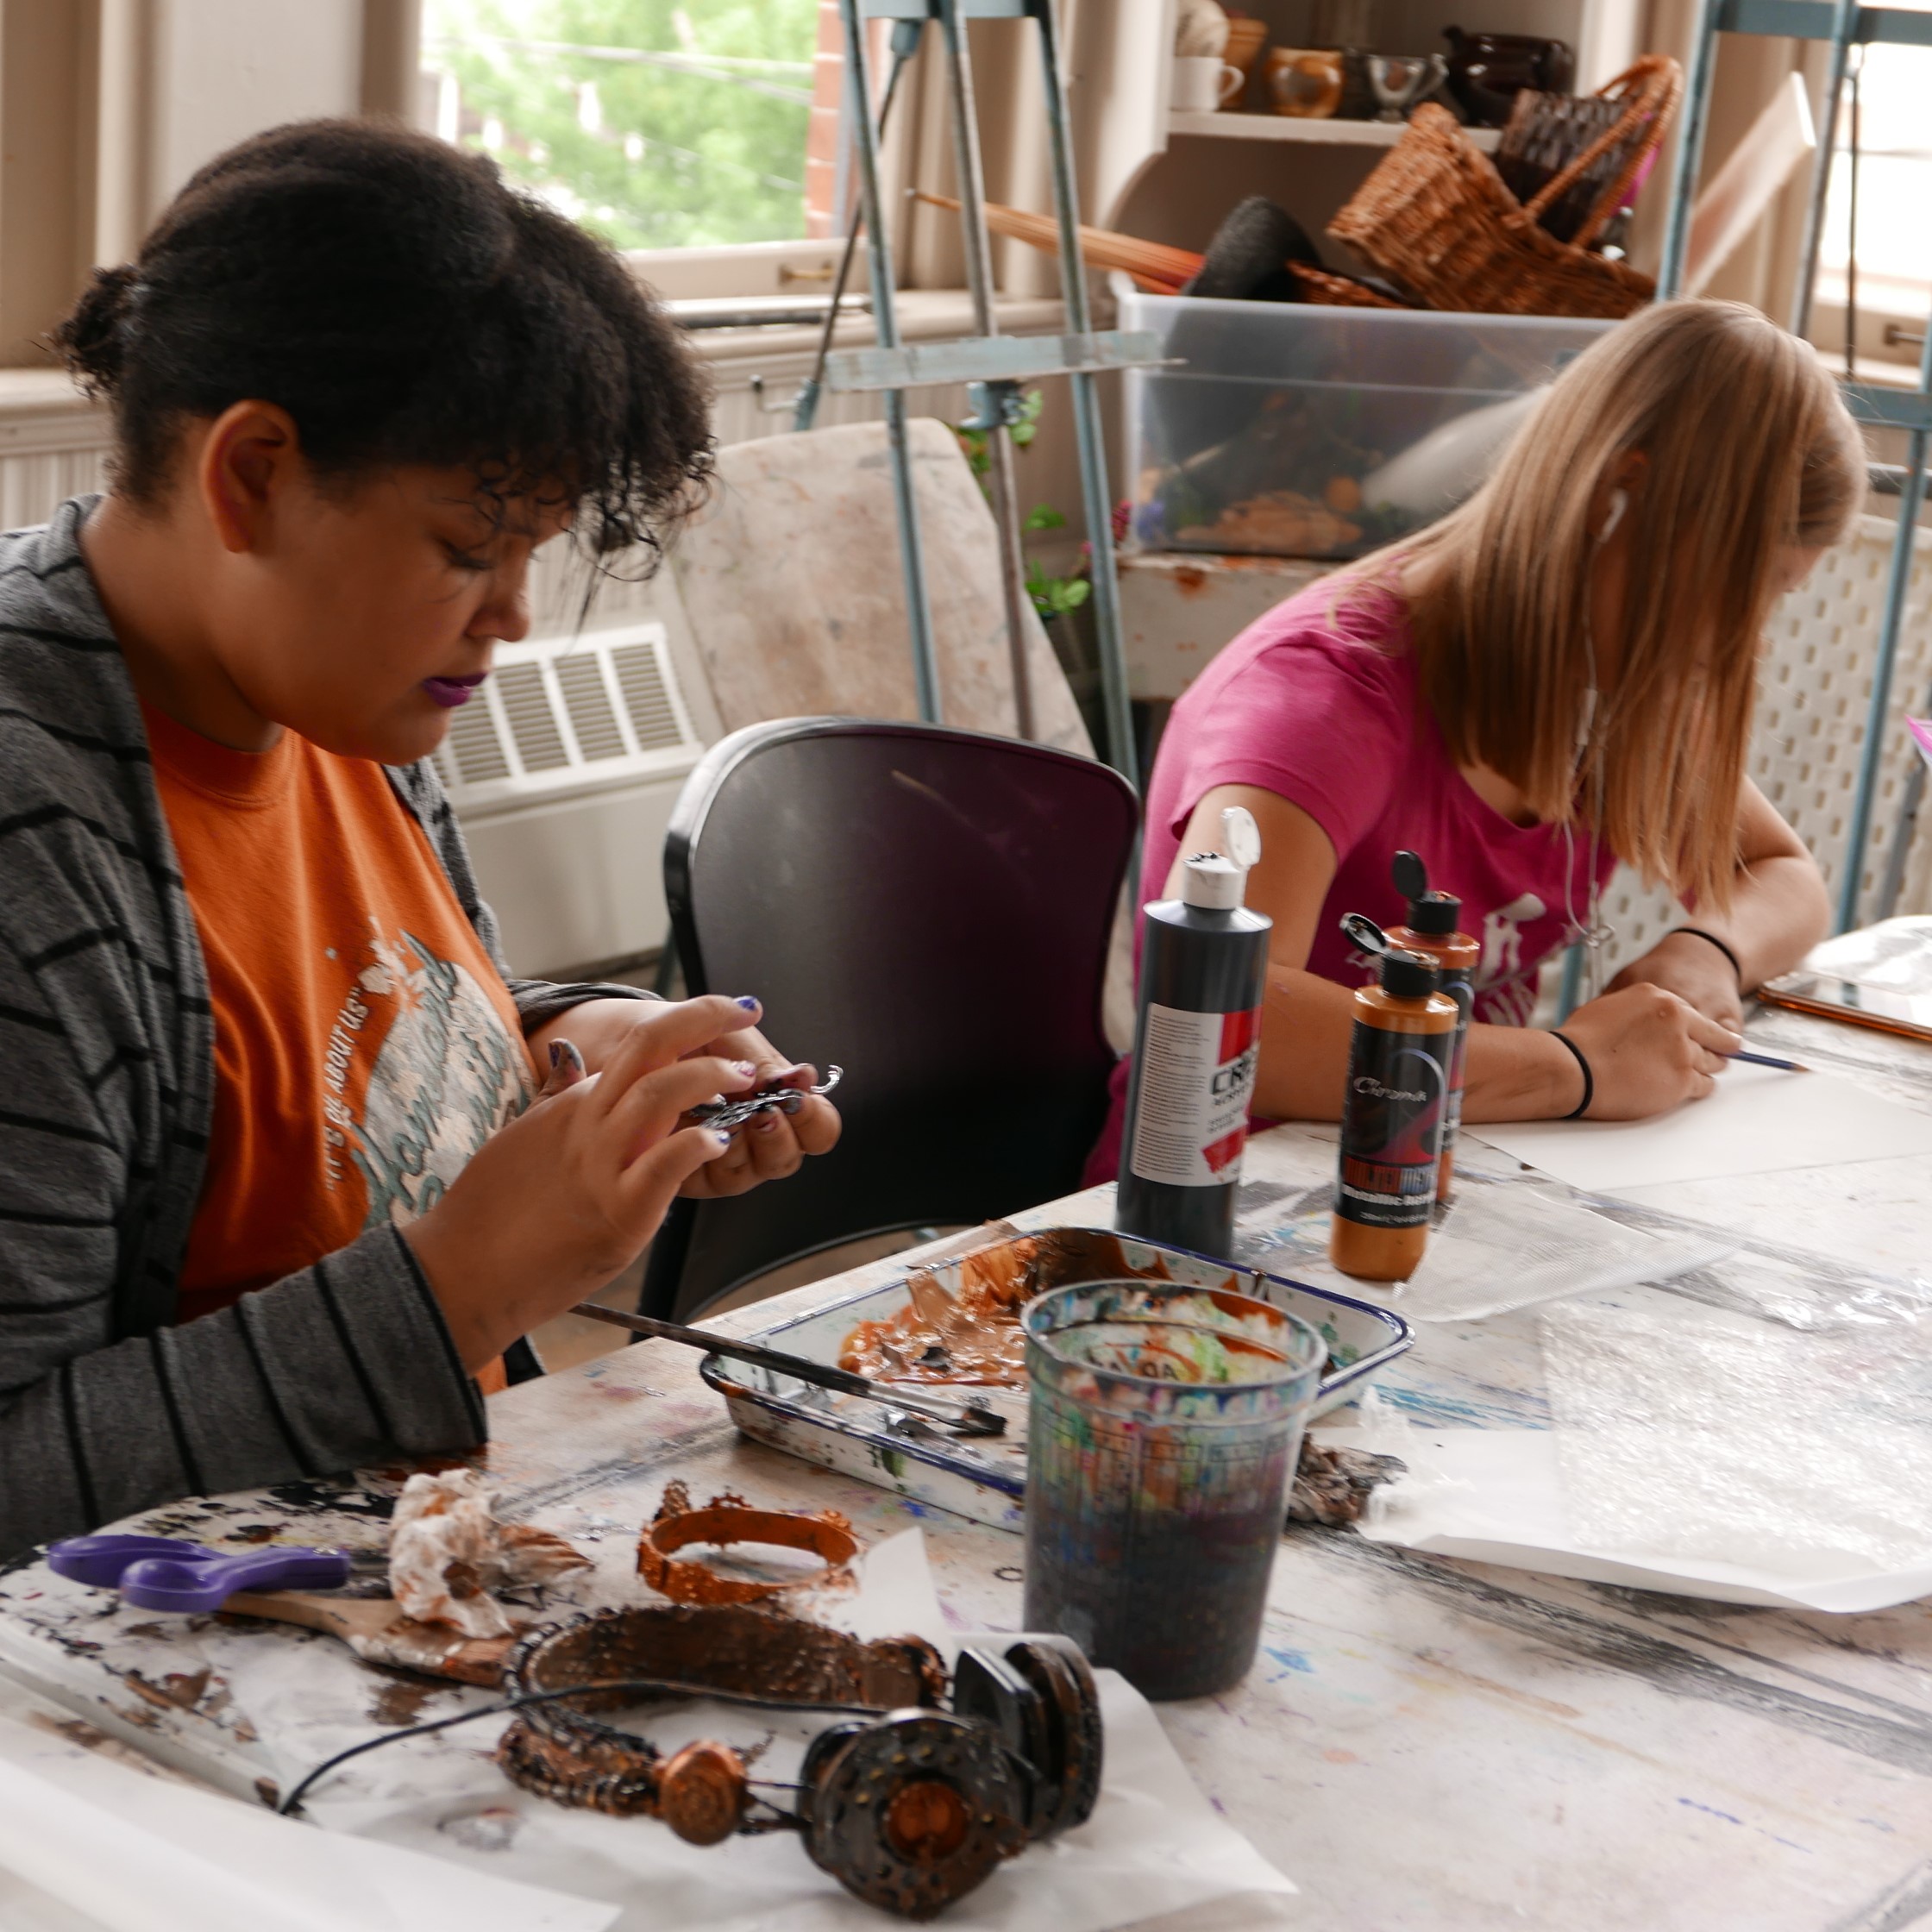 Ages 14-17 | Teen Studio Night: Paint, Draw, Mixed Media